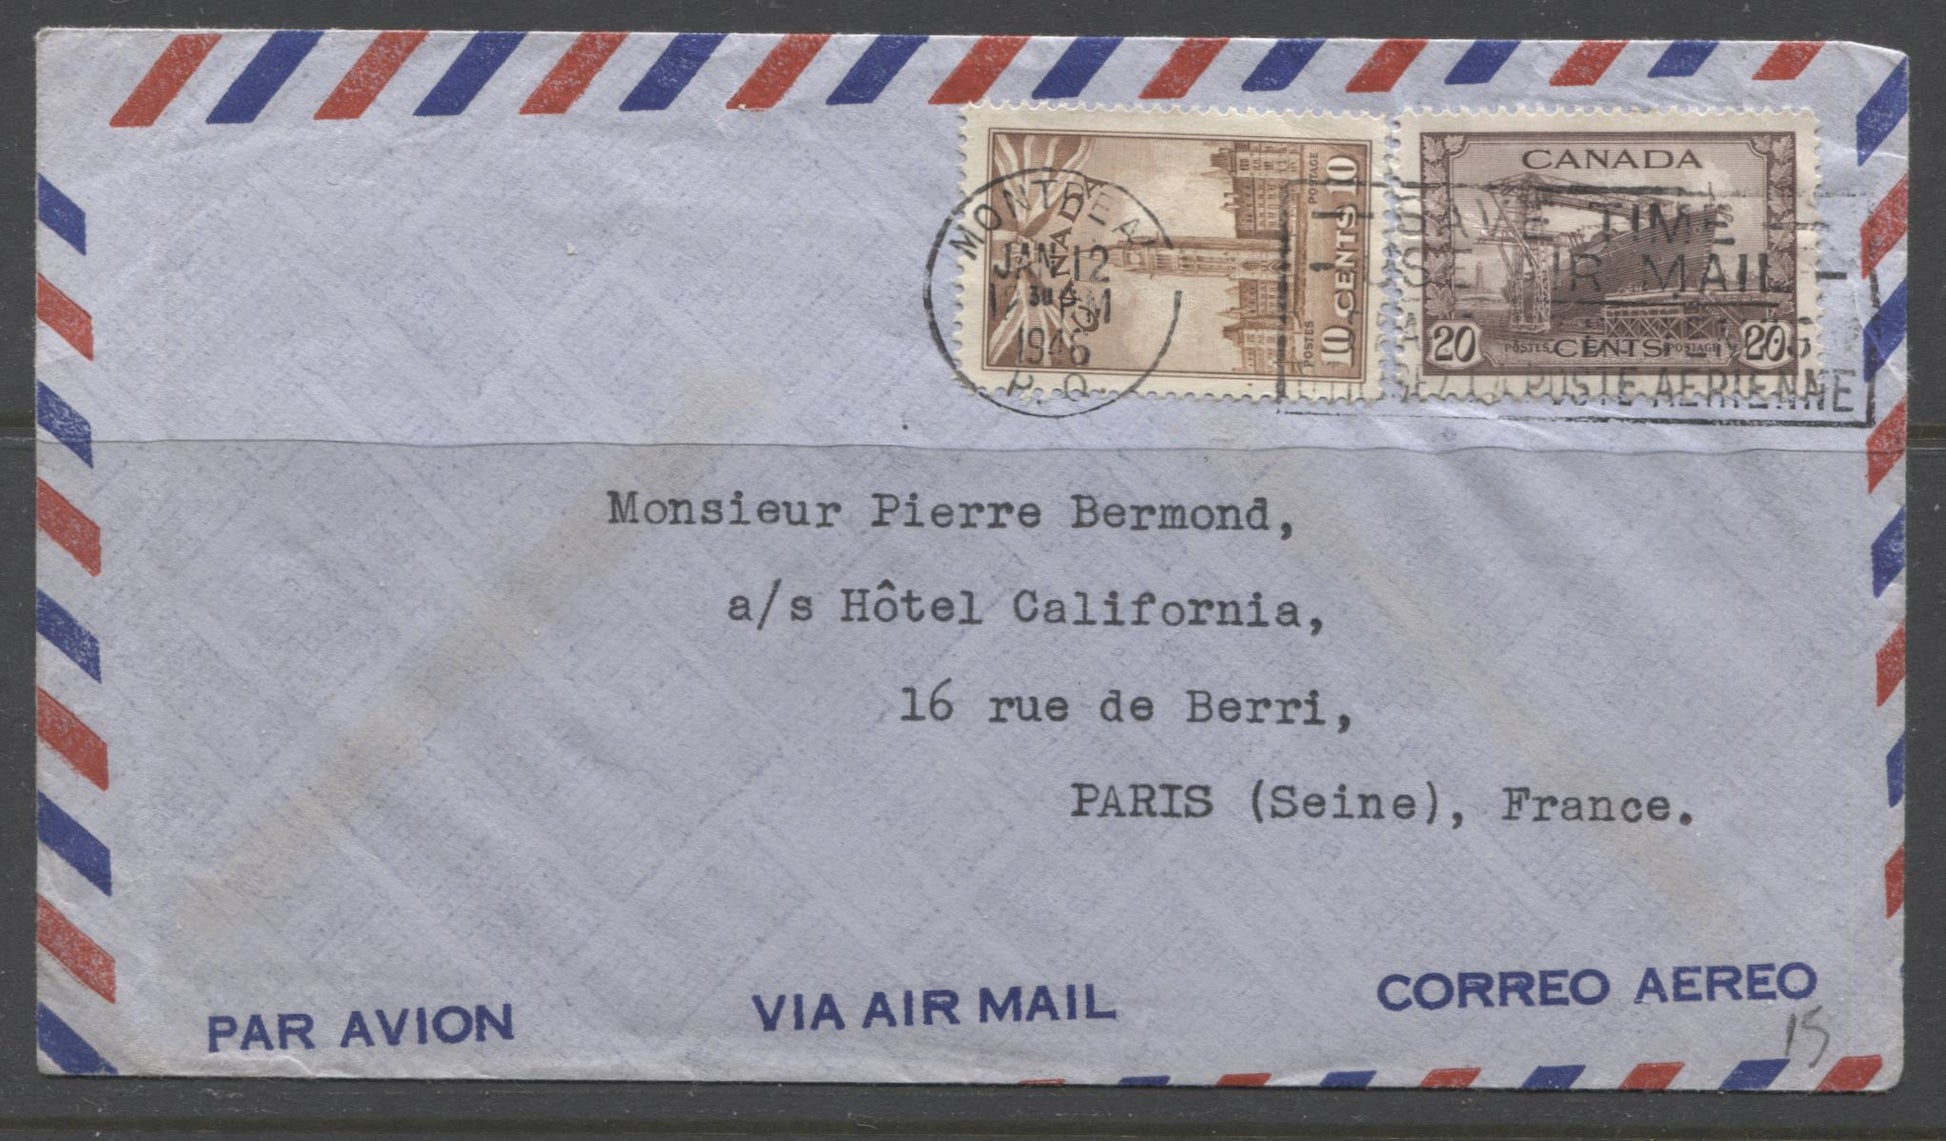 A Very Fine 1946 War Issue Airmail Cover From Montreal to Paris, Franked With 10c Parliament Buildings and 20c Corvette Stamps Brixton Chrome 